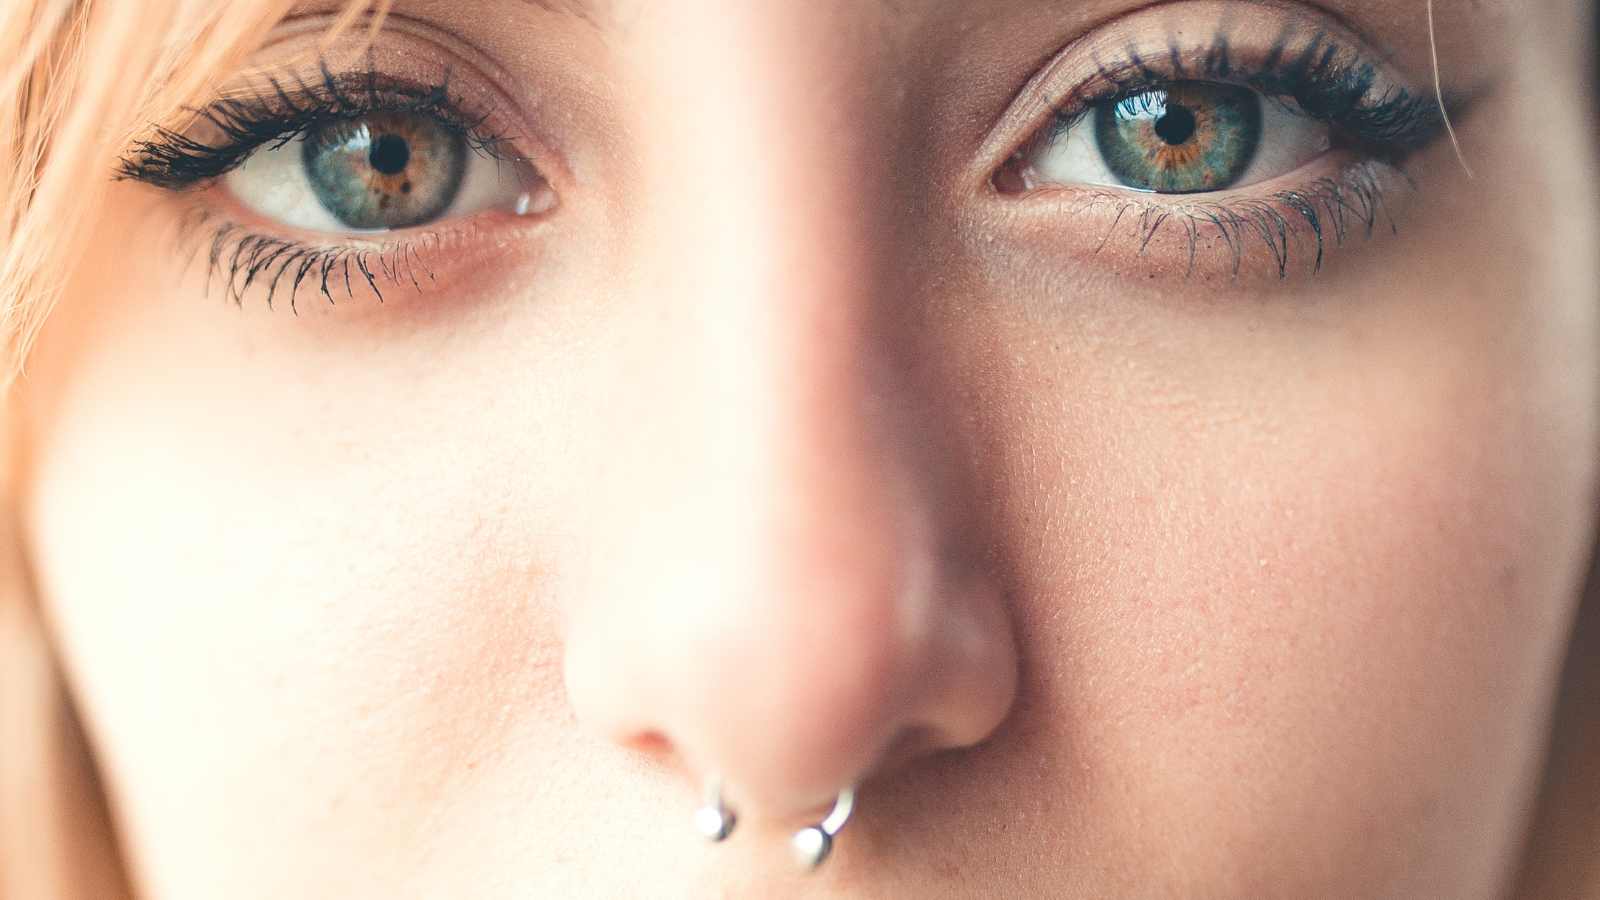 nose piercing aftercare tips and tricks